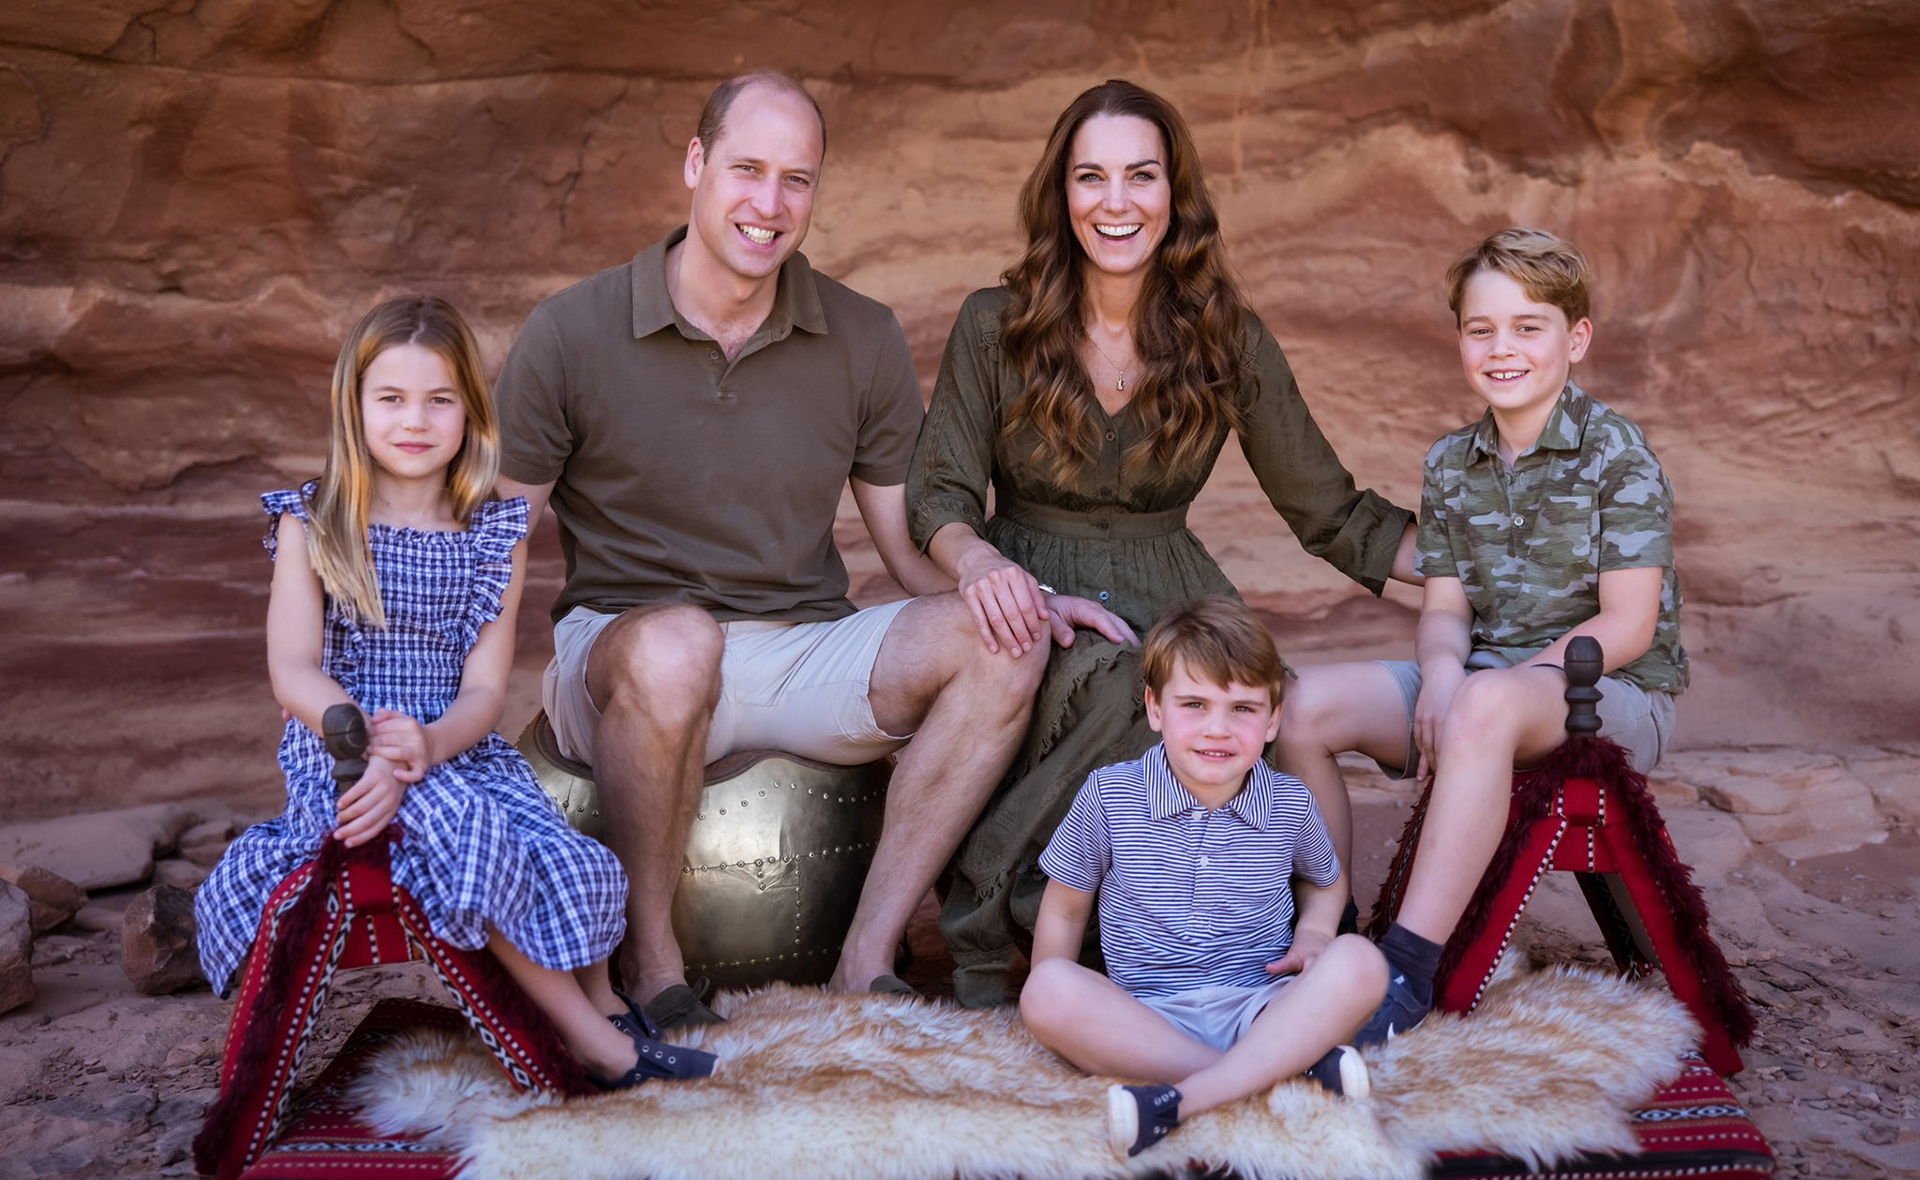 How this 2021 royal Christmas card ignited debate online, and why we’re still eagerly awaiting a very important festive photo